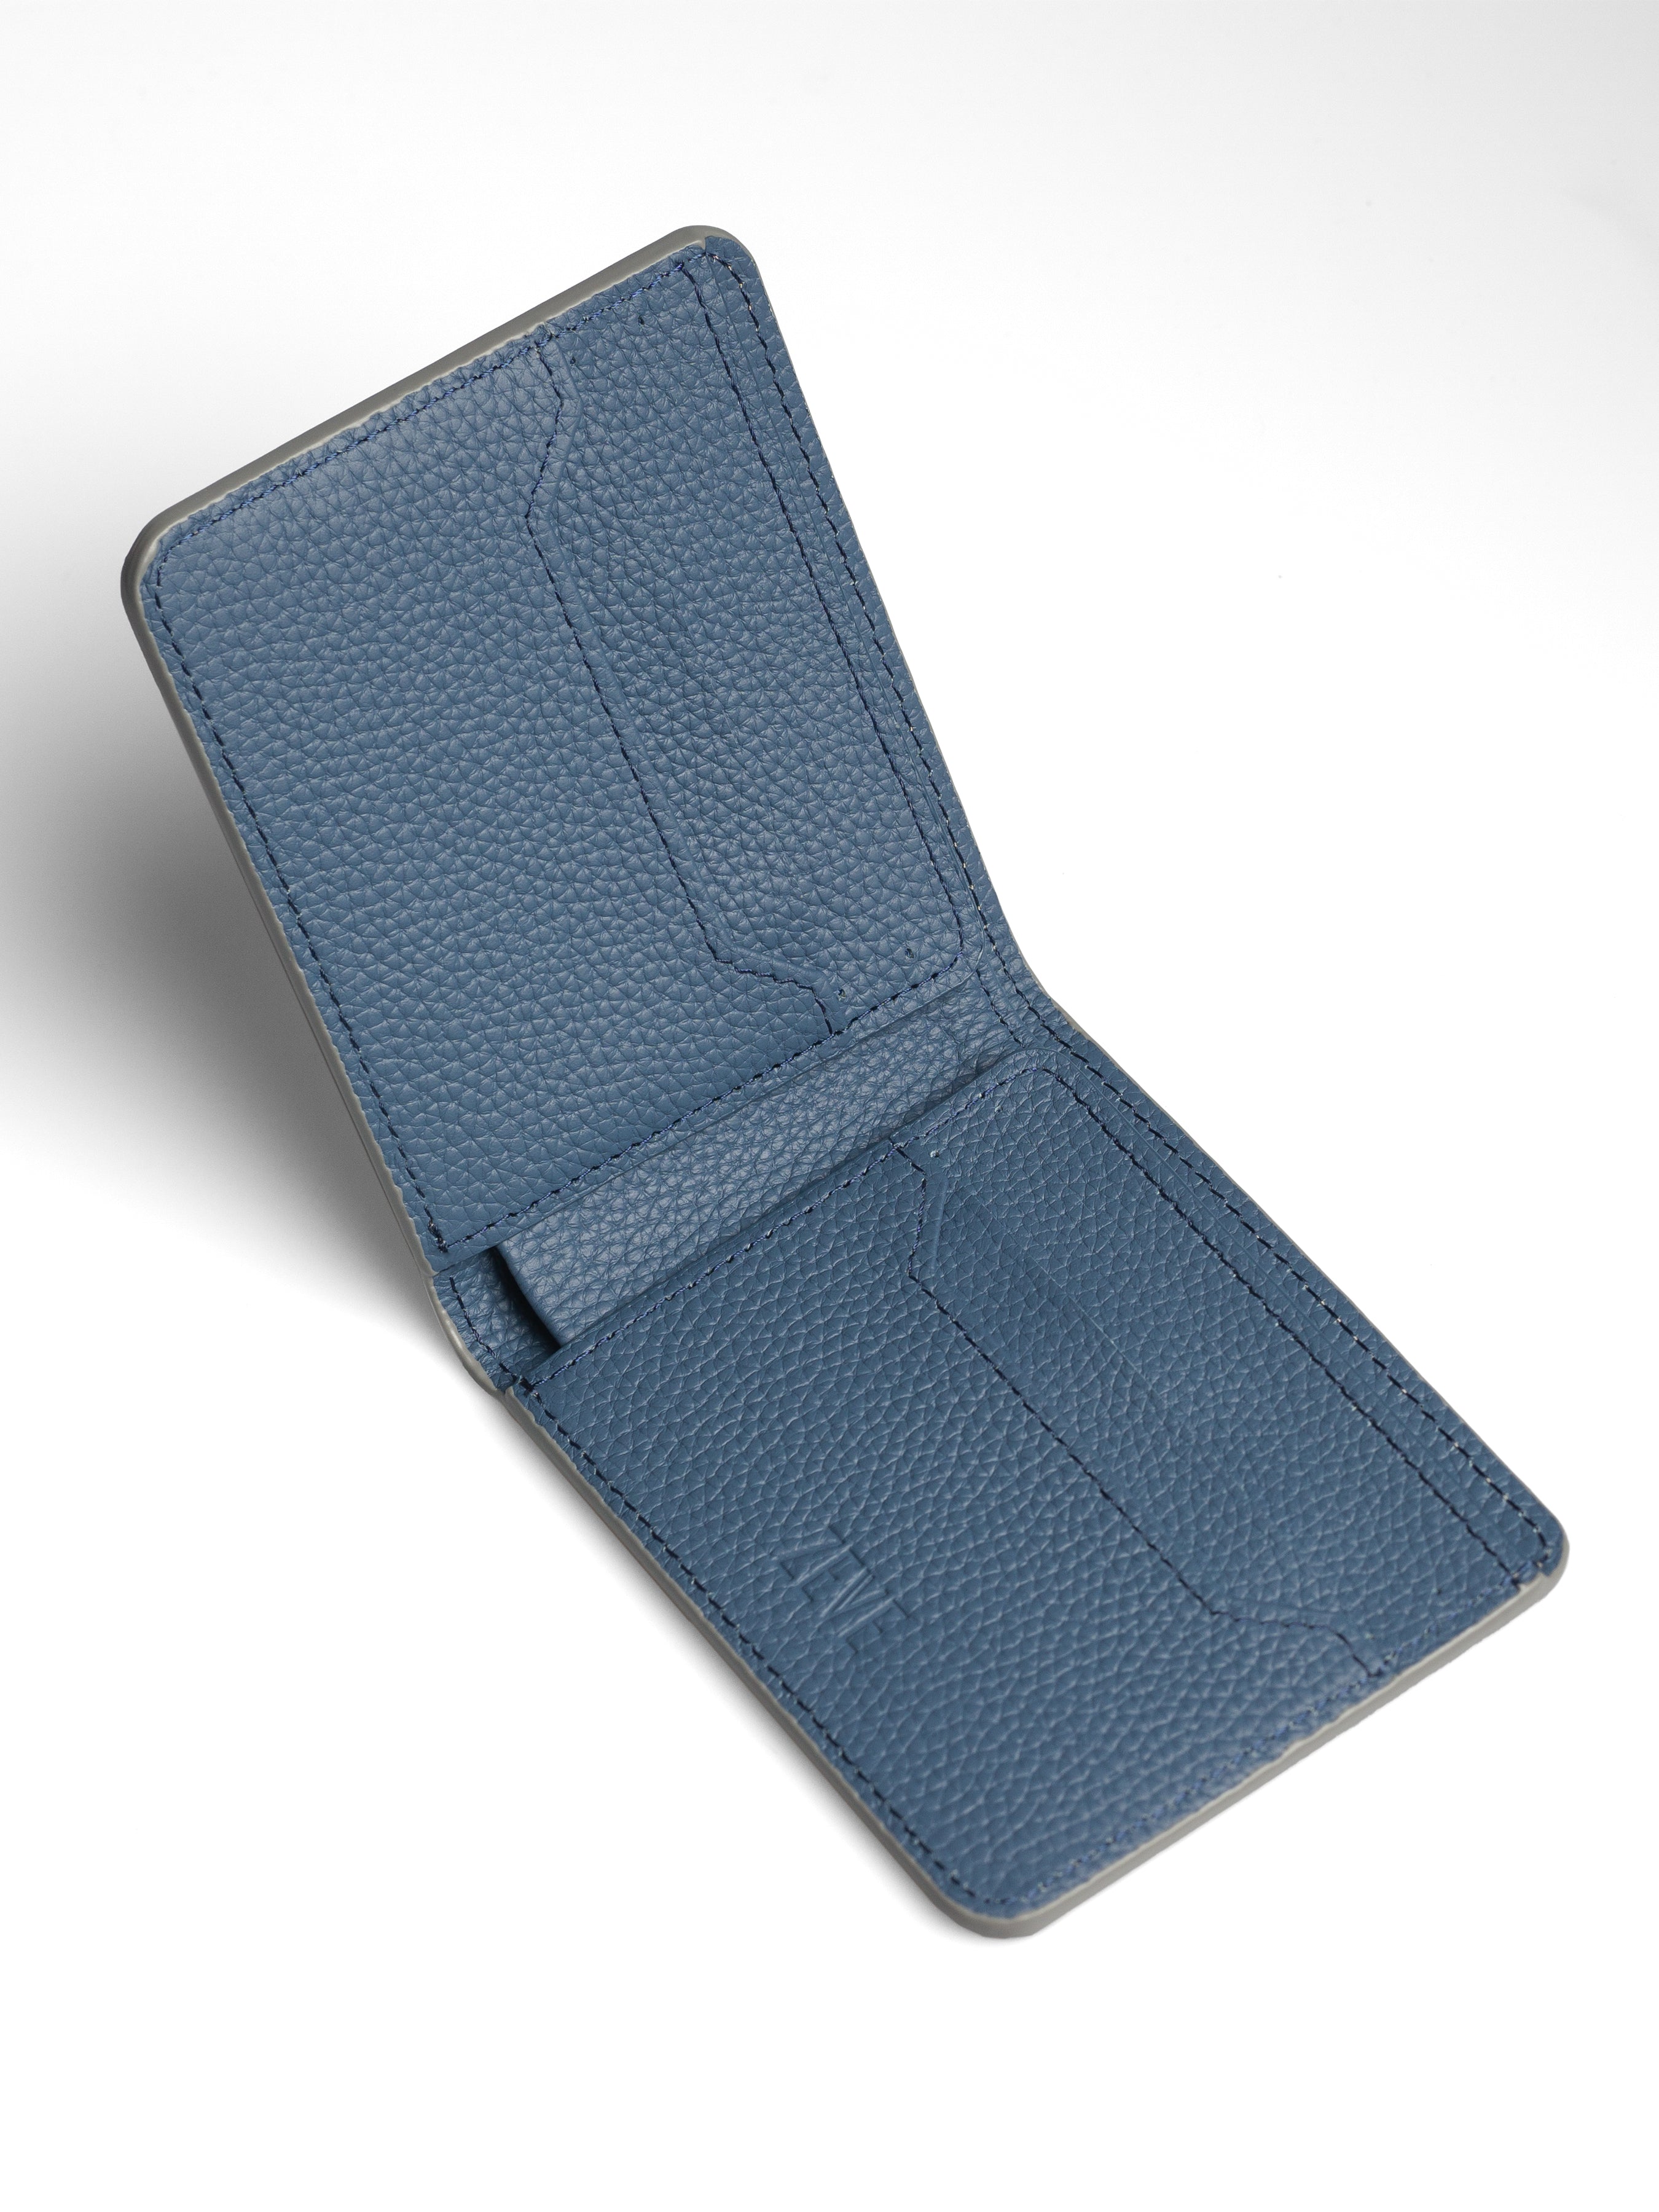 Artemis Python Wallet - Grey and Blue Leather